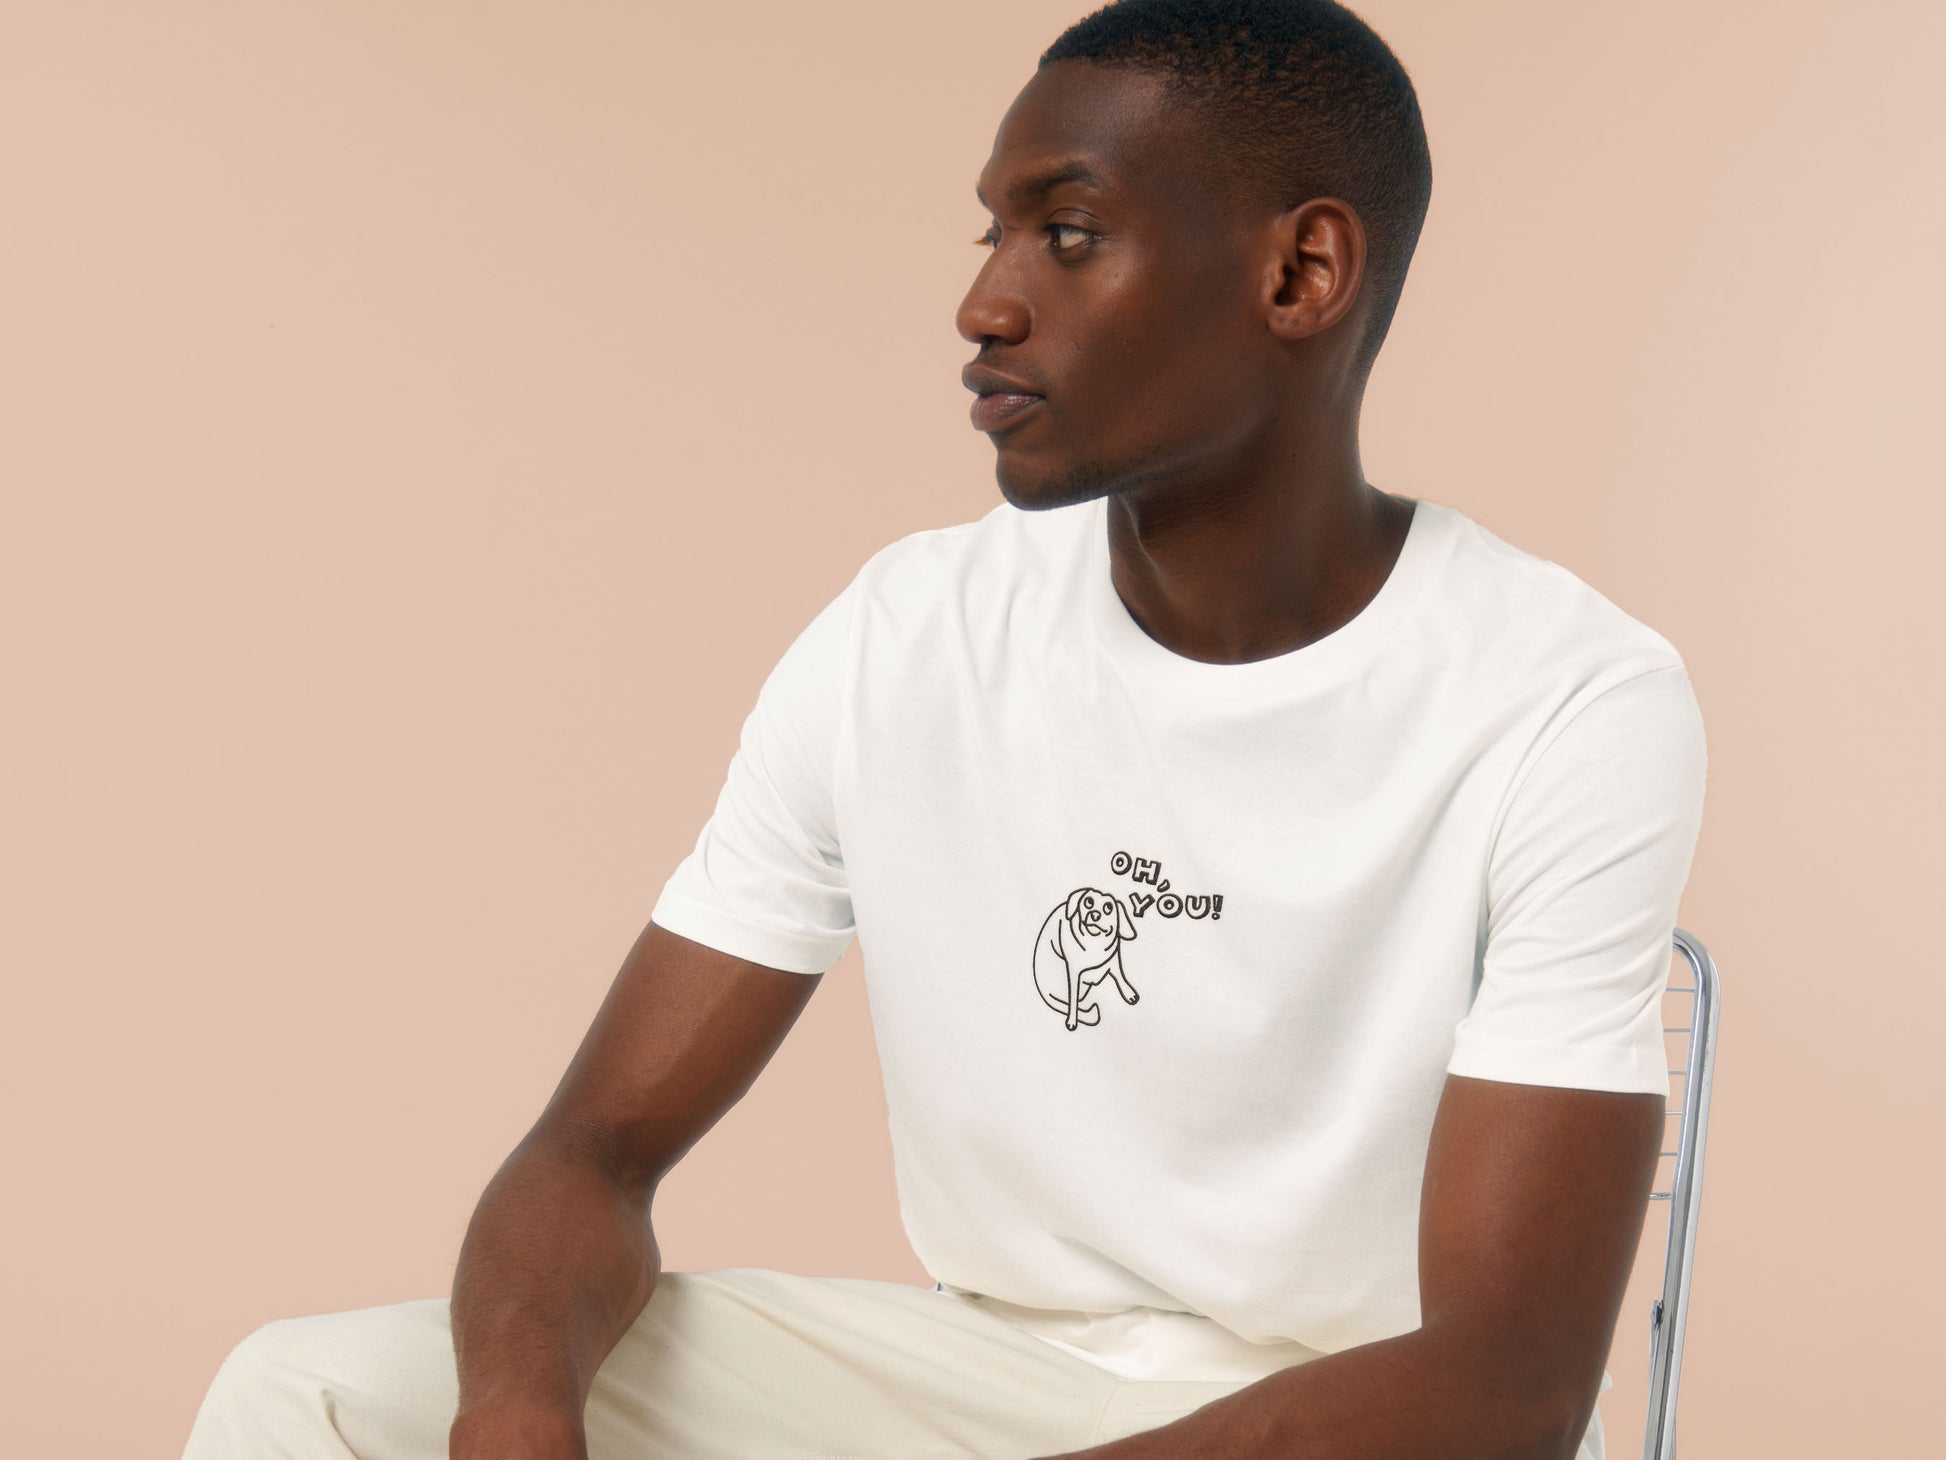 Man wearing an off white crew neck short sleeve t-shirt, with an embroidered black thread design of cute meme dog with cheeky expression and big eyes, with the text Oh You!